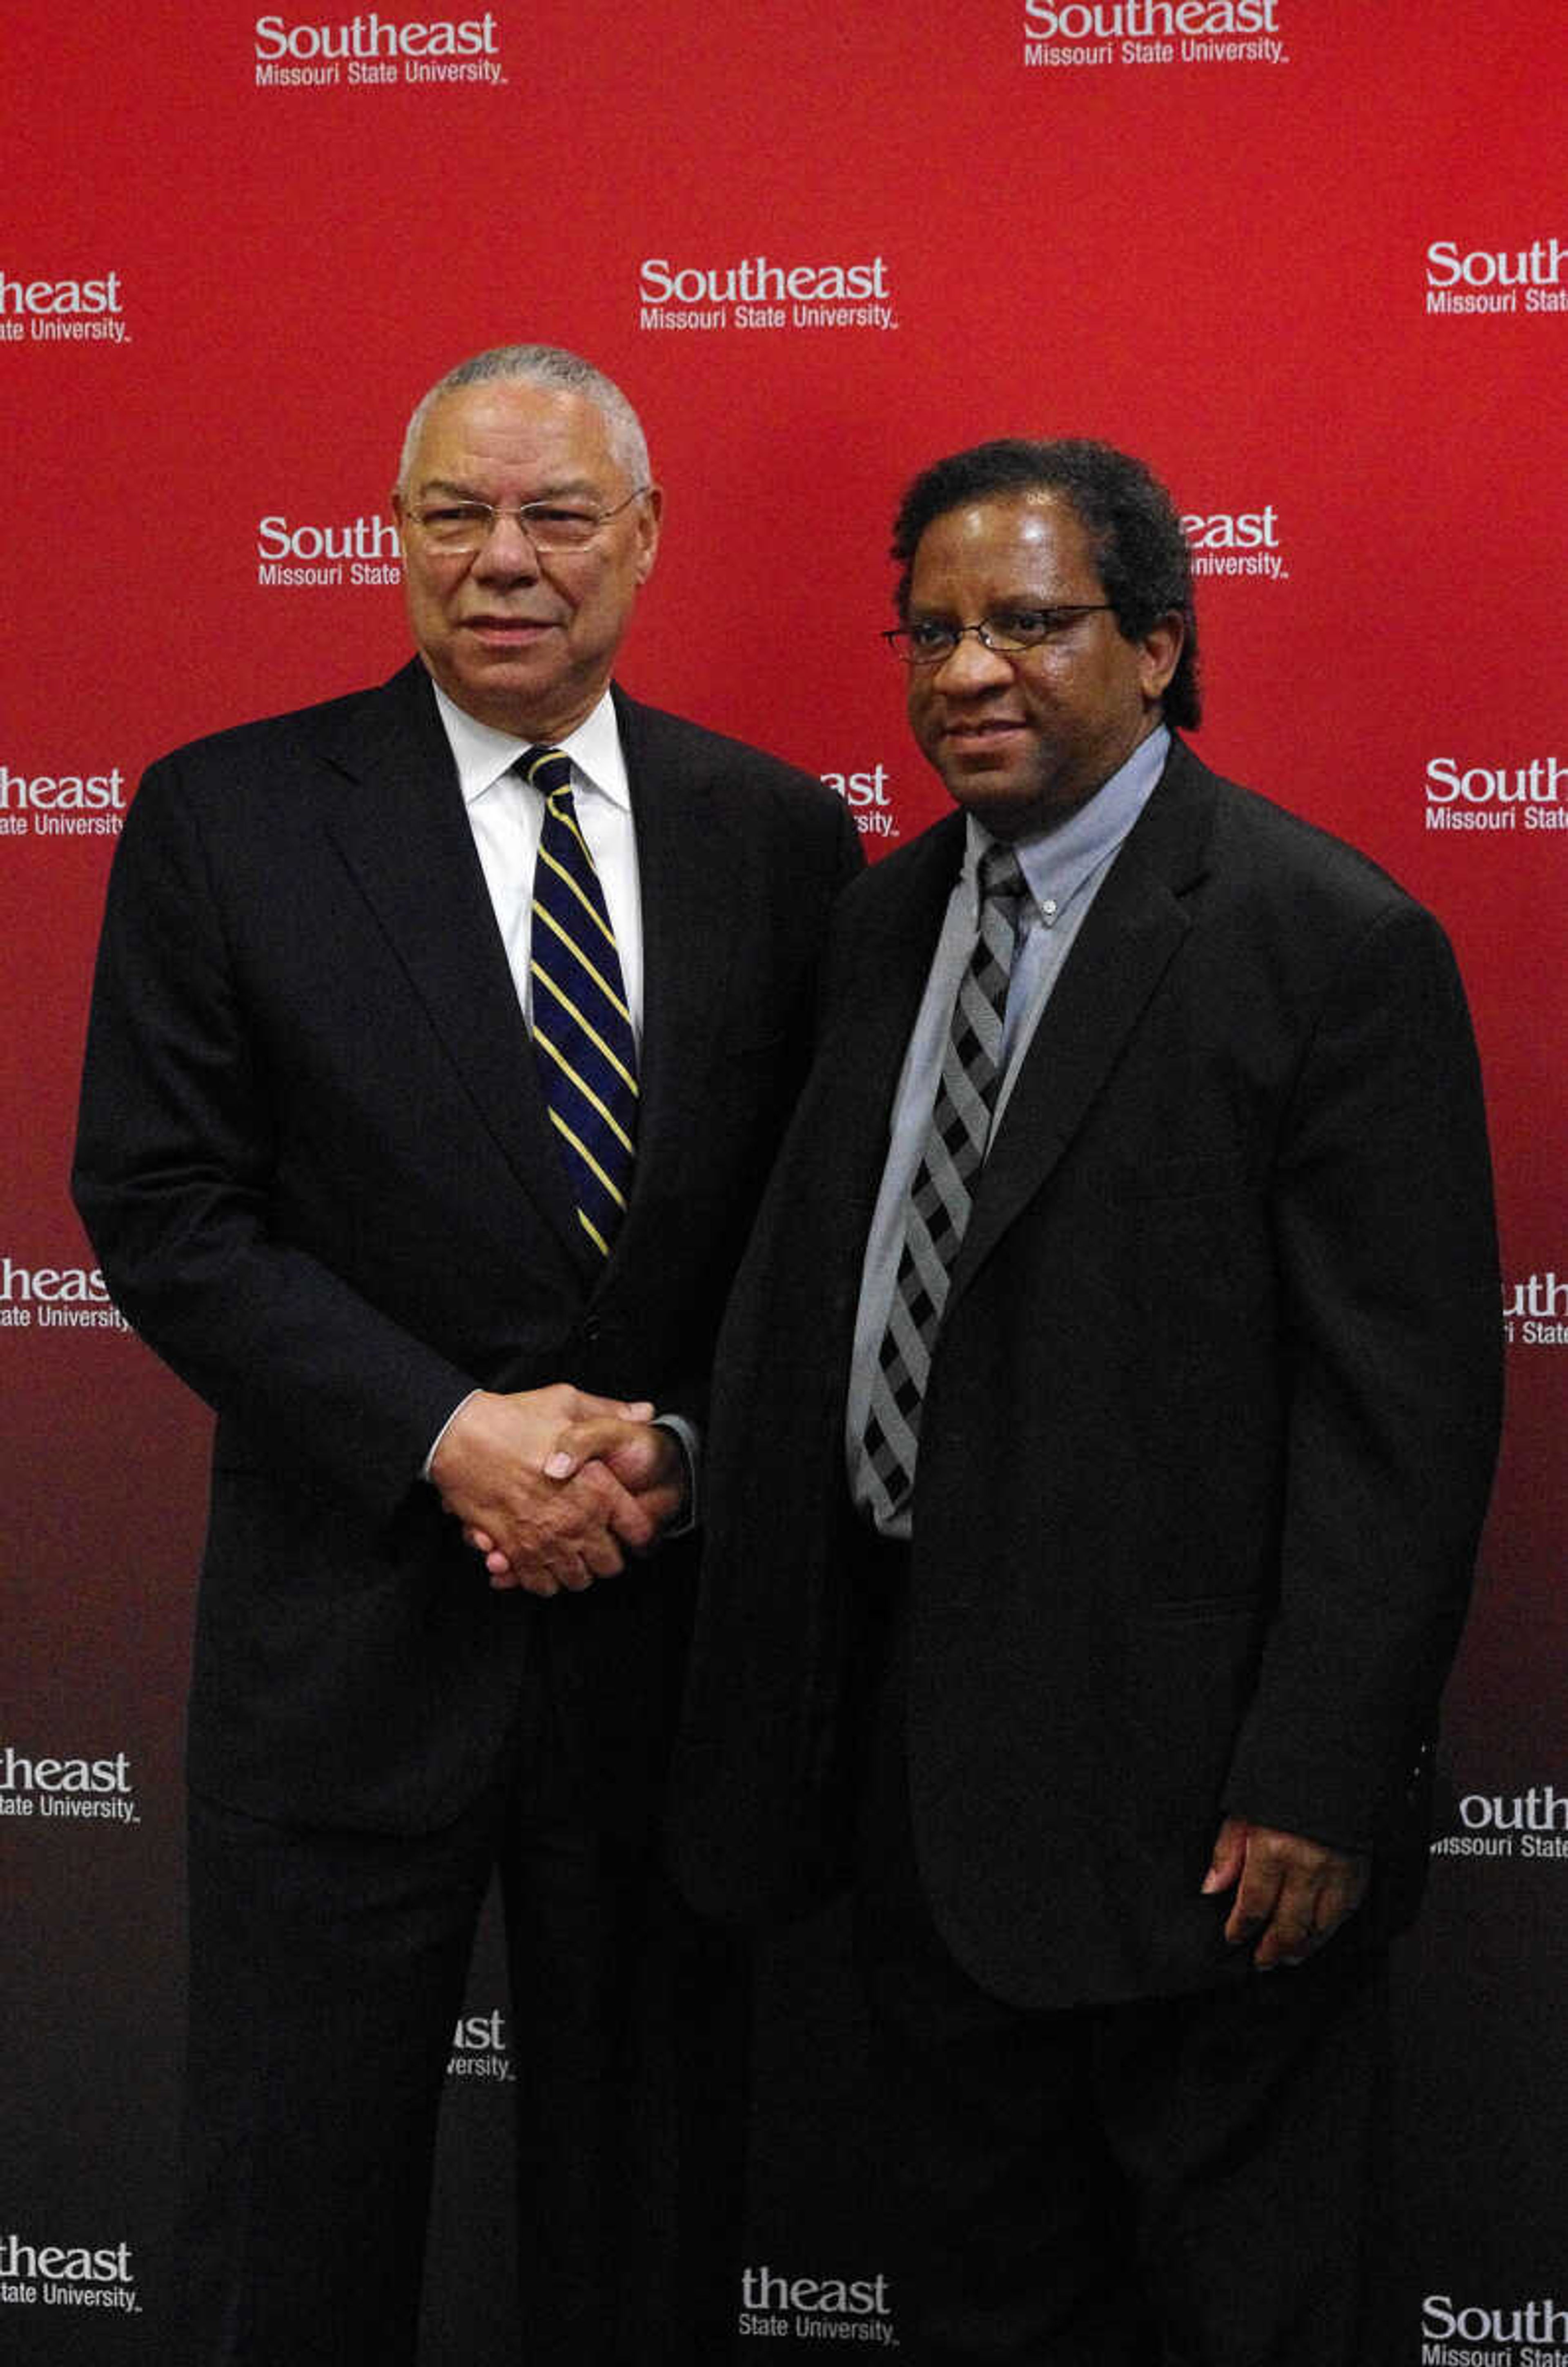 Gen. Colin L. Powell, left, Dr. Willie Redmond, right, shake hands. Dr. Redmond is a professor in the Department of Economics and Finance. Photo by Nathan Hamilton.